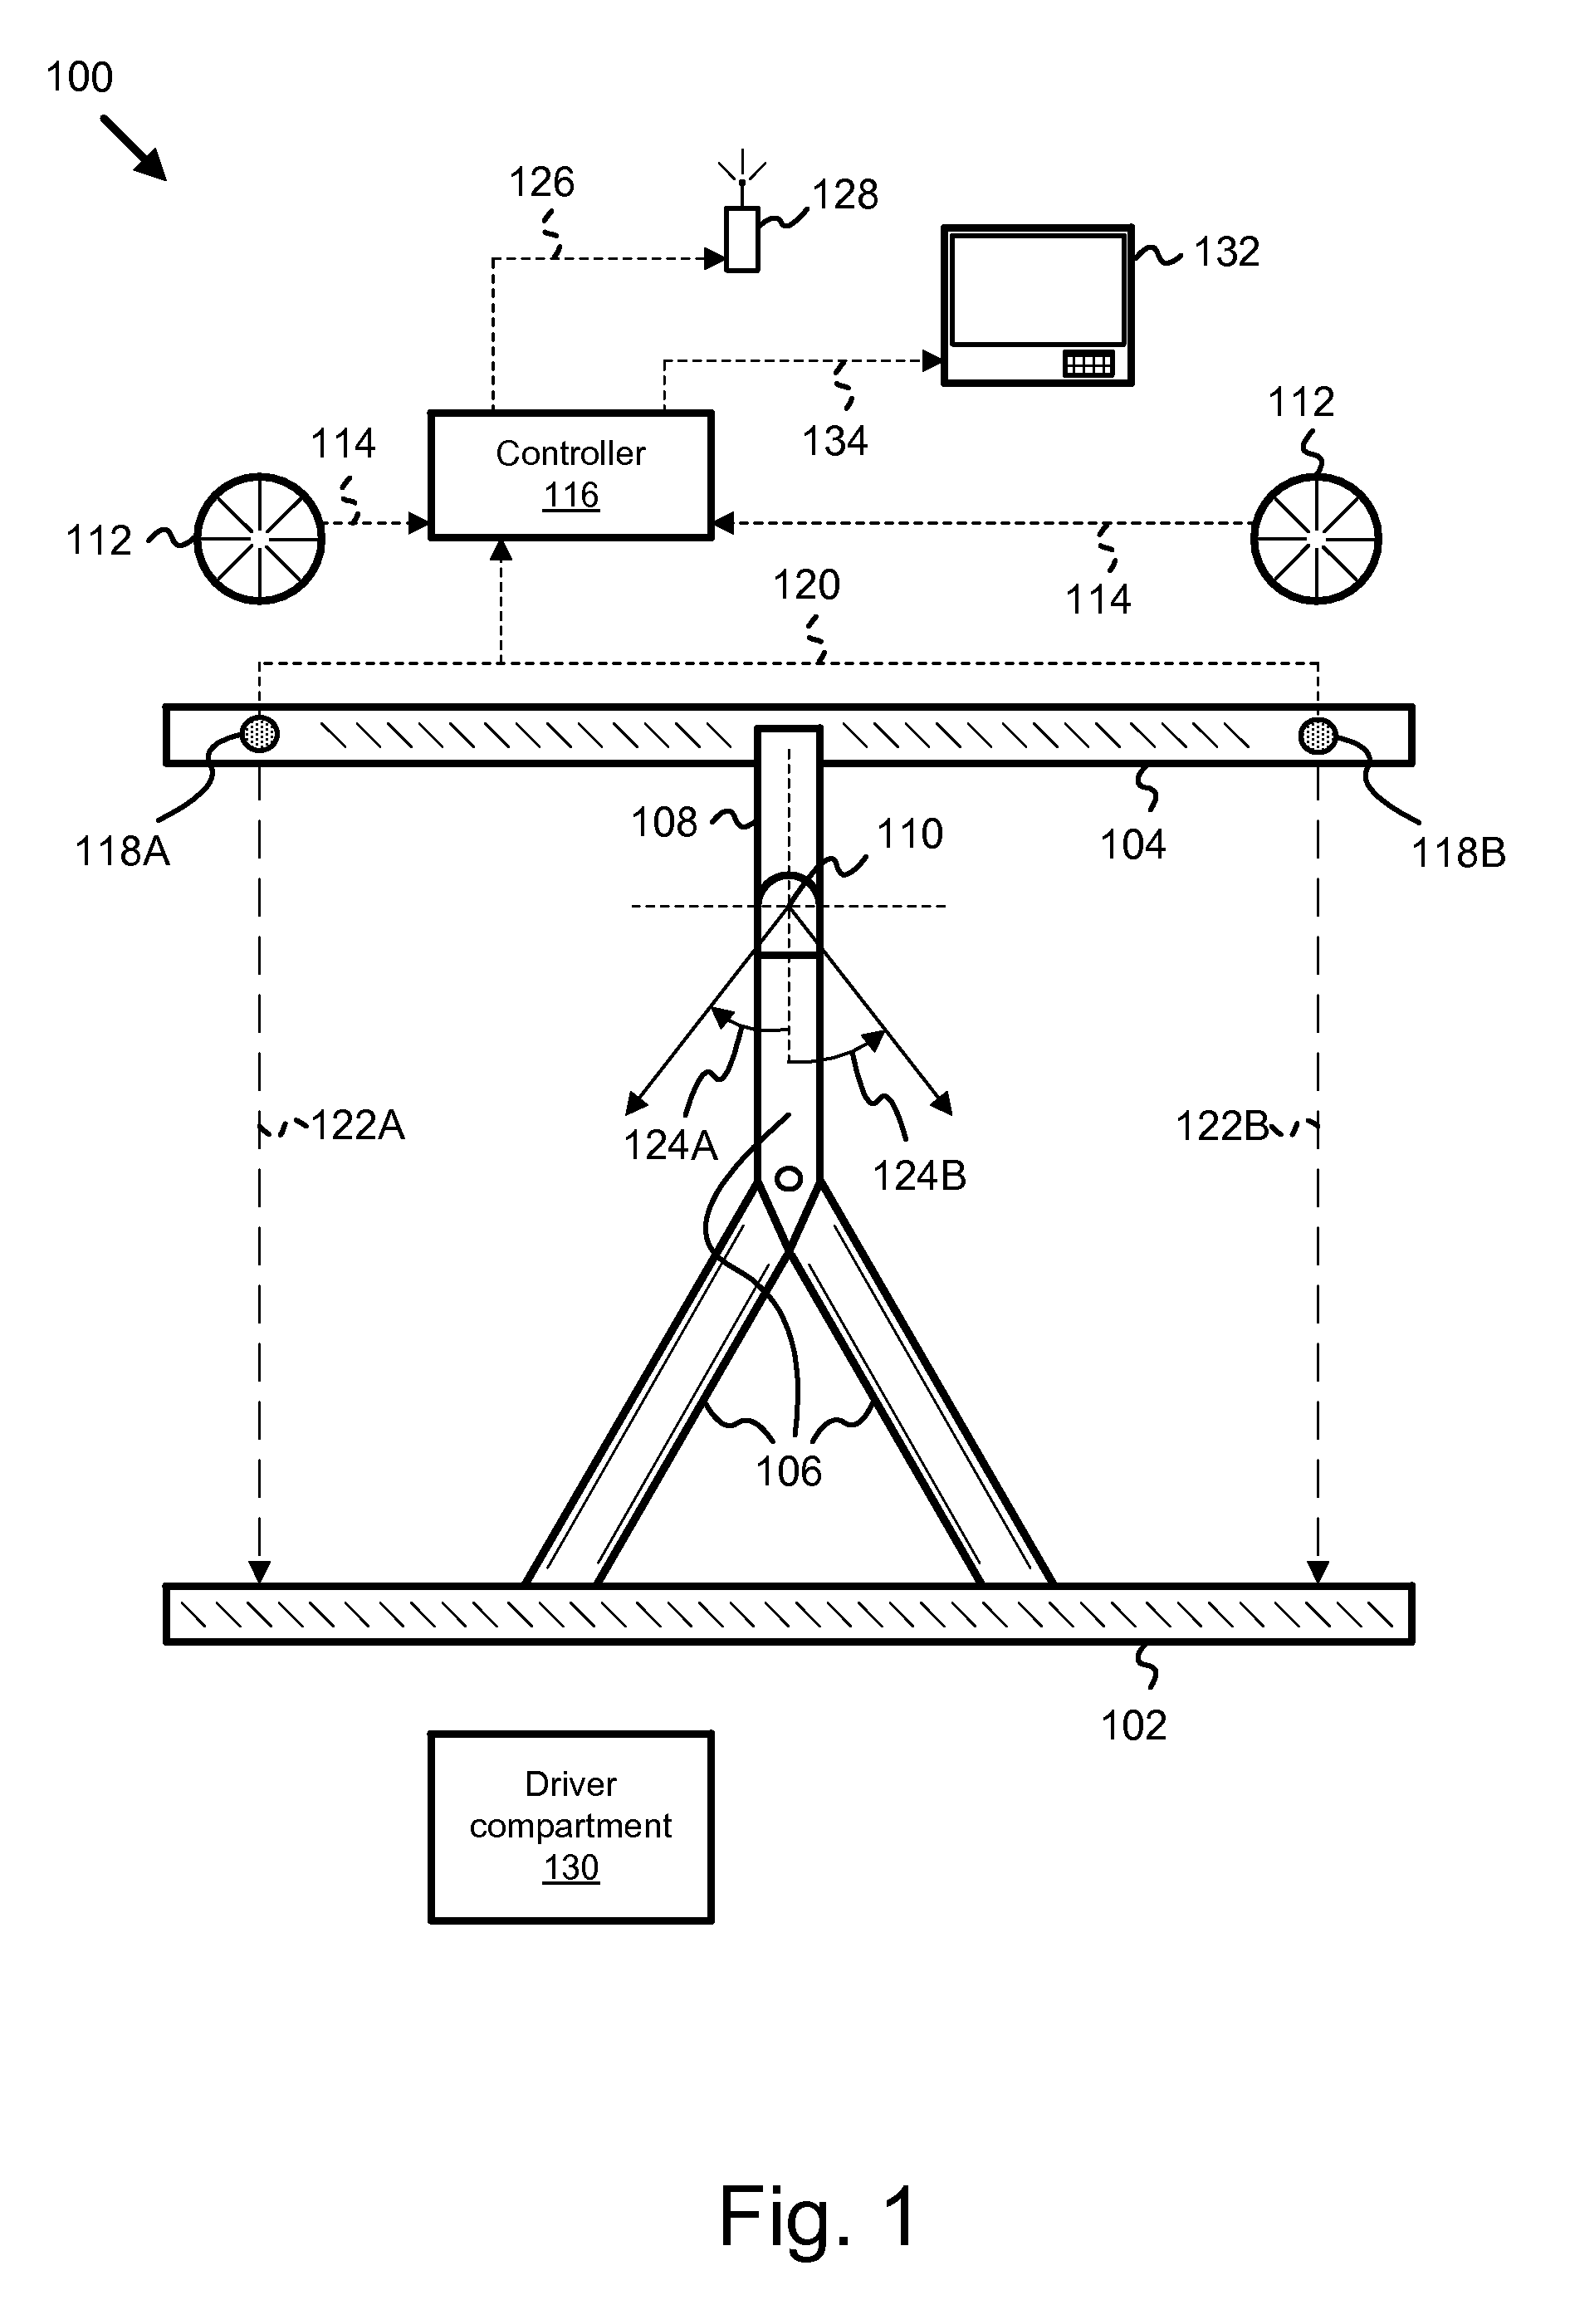 Apparatus, system, and method for back up control of a towed vehicle